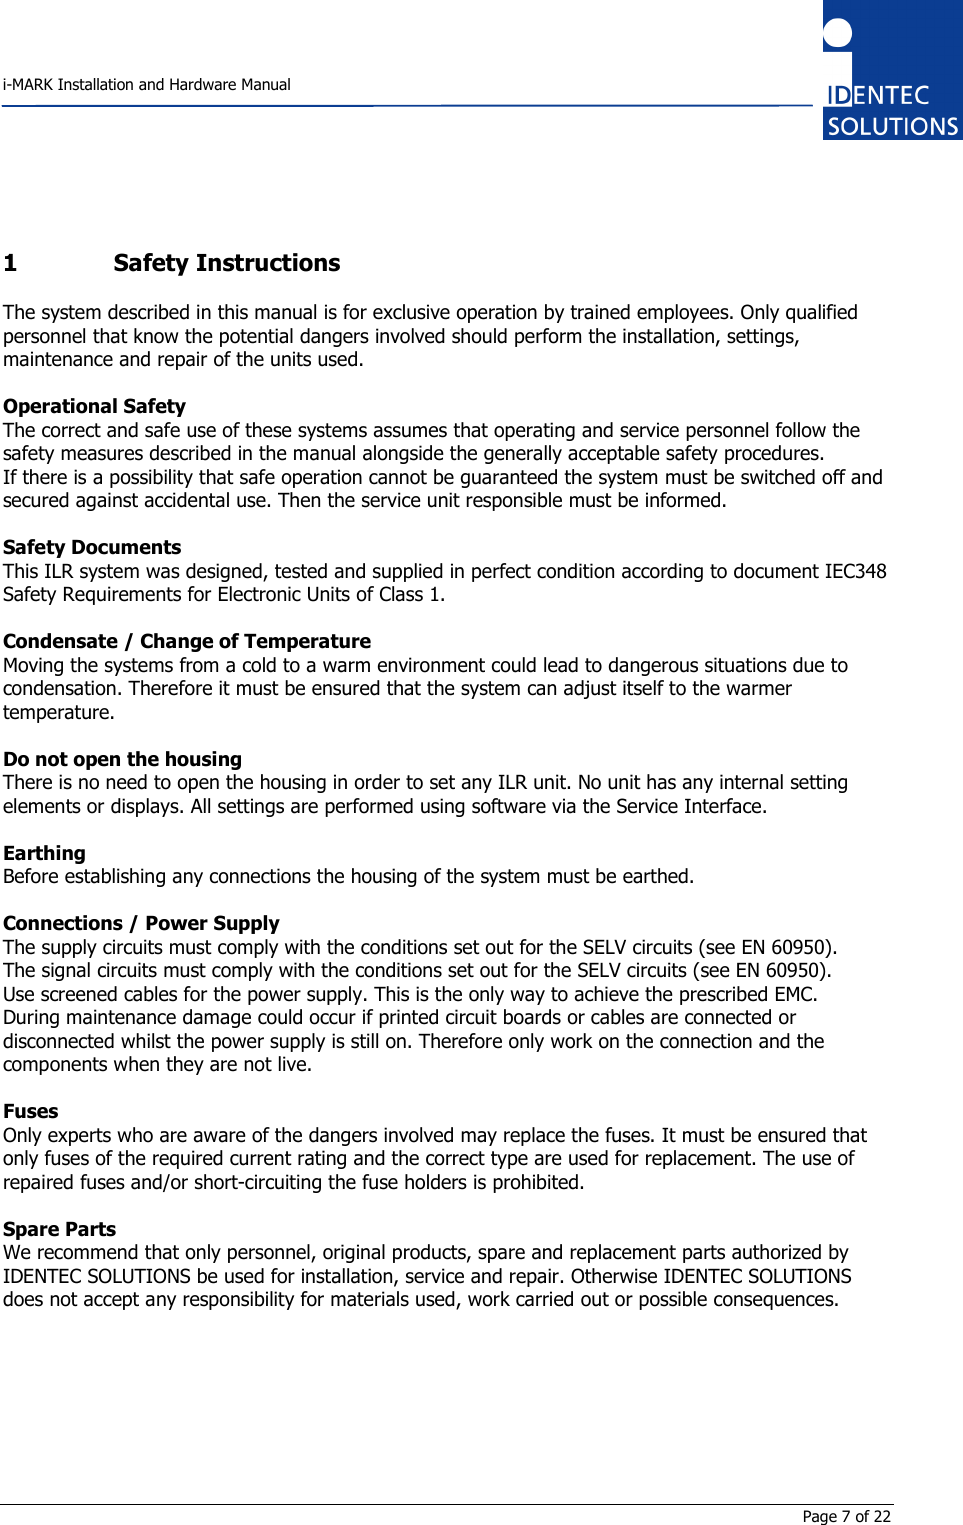    i-MARK Installation and Hardware Manual       Page 7 of 22 1 Safety Instructions The system described in this manual is for exclusive operation by trained employees. Only qualified personnel that know the potential dangers involved should perform the installation, settings, maintenance and repair of the units used.  Operational Safety The correct and safe use of these systems assumes that operating and service personnel follow the safety measures described in the manual alongside the generally acceptable safety procedures. If there is a possibility that safe operation cannot be guaranteed the system must be switched off and secured against accidental use. Then the service unit responsible must be informed.  Safety Documents This ILR system was designed, tested and supplied in perfect condition according to document IEC348 Safety Requirements for Electronic Units of Class 1.  Condensate / Change of Temperature Moving the systems from a cold to a warm environment could lead to dangerous situations due to condensation. Therefore it must be ensured that the system can adjust itself to the warmer temperature.  Do not open the housing There is no need to open the housing in order to set any ILR unit. No unit has any internal setting elements or displays. All settings are performed using software via the Service Interface.  Earthing Before establishing any connections the housing of the system must be earthed.  Connections / Power Supply The supply circuits must comply with the conditions set out for the SELV circuits (see EN 60950). The signal circuits must comply with the conditions set out for the SELV circuits (see EN 60950). Use screened cables for the power supply. This is the only way to achieve the prescribed EMC. During maintenance damage could occur if printed circuit boards or cables are connected or disconnected whilst the power supply is still on. Therefore only work on the connection and the components when they are not live.  Fuses Only experts who are aware of the dangers involved may replace the fuses. It must be ensured that only fuses of the required current rating and the correct type are used for replacement. The use of repaired fuses and/or short-circuiting the fuse holders is prohibited.  Spare Parts We recommend that only personnel, original products, spare and replacement parts authorized by IDENTEC SOLUTIONS be used for installation, service and repair. Otherwise IDENTEC SOLUTIONS does not accept any responsibility for materials used, work carried out or possible consequences.        